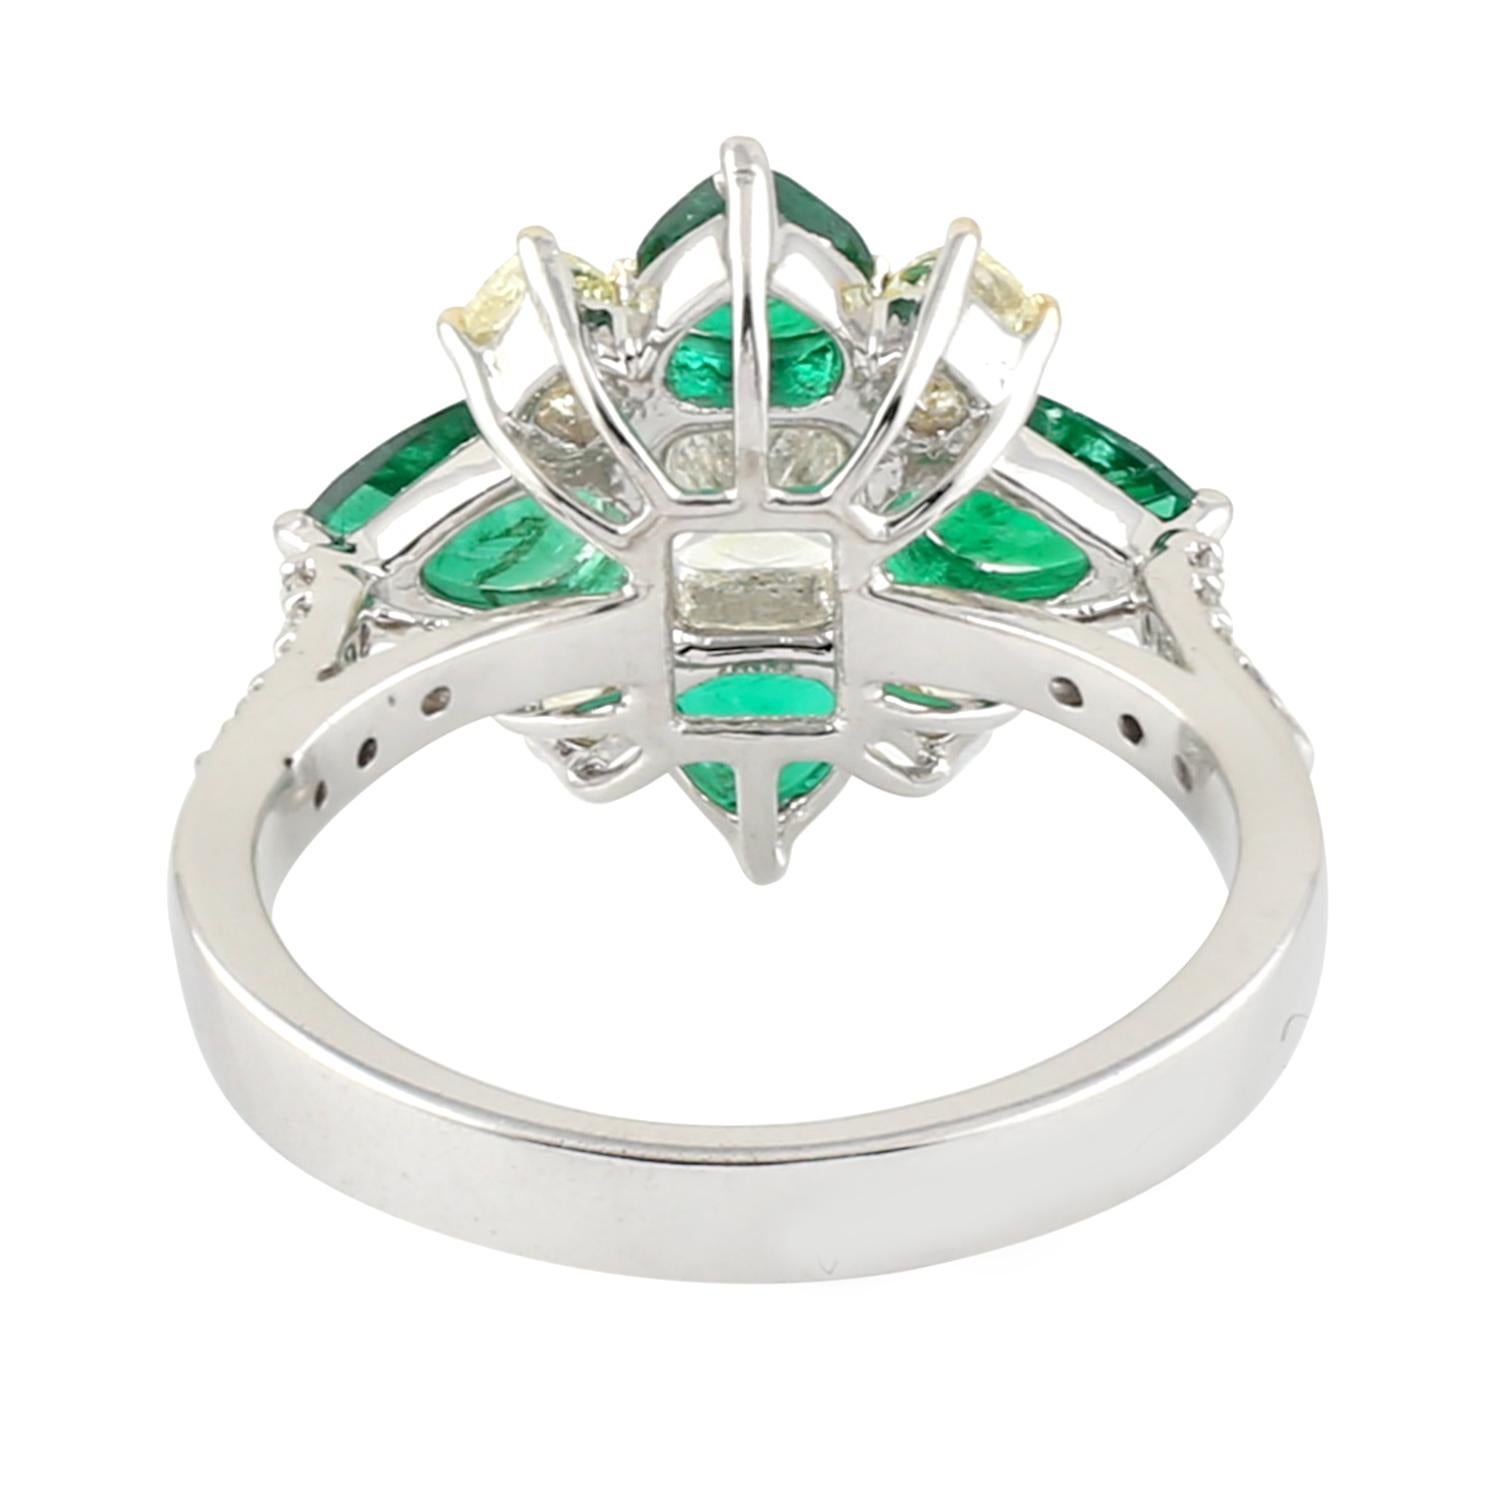 Contemporary 1.14 ct Pear Shaped Zambian Emeralds Flower Ring with Diamonds In 18k White Gold For Sale